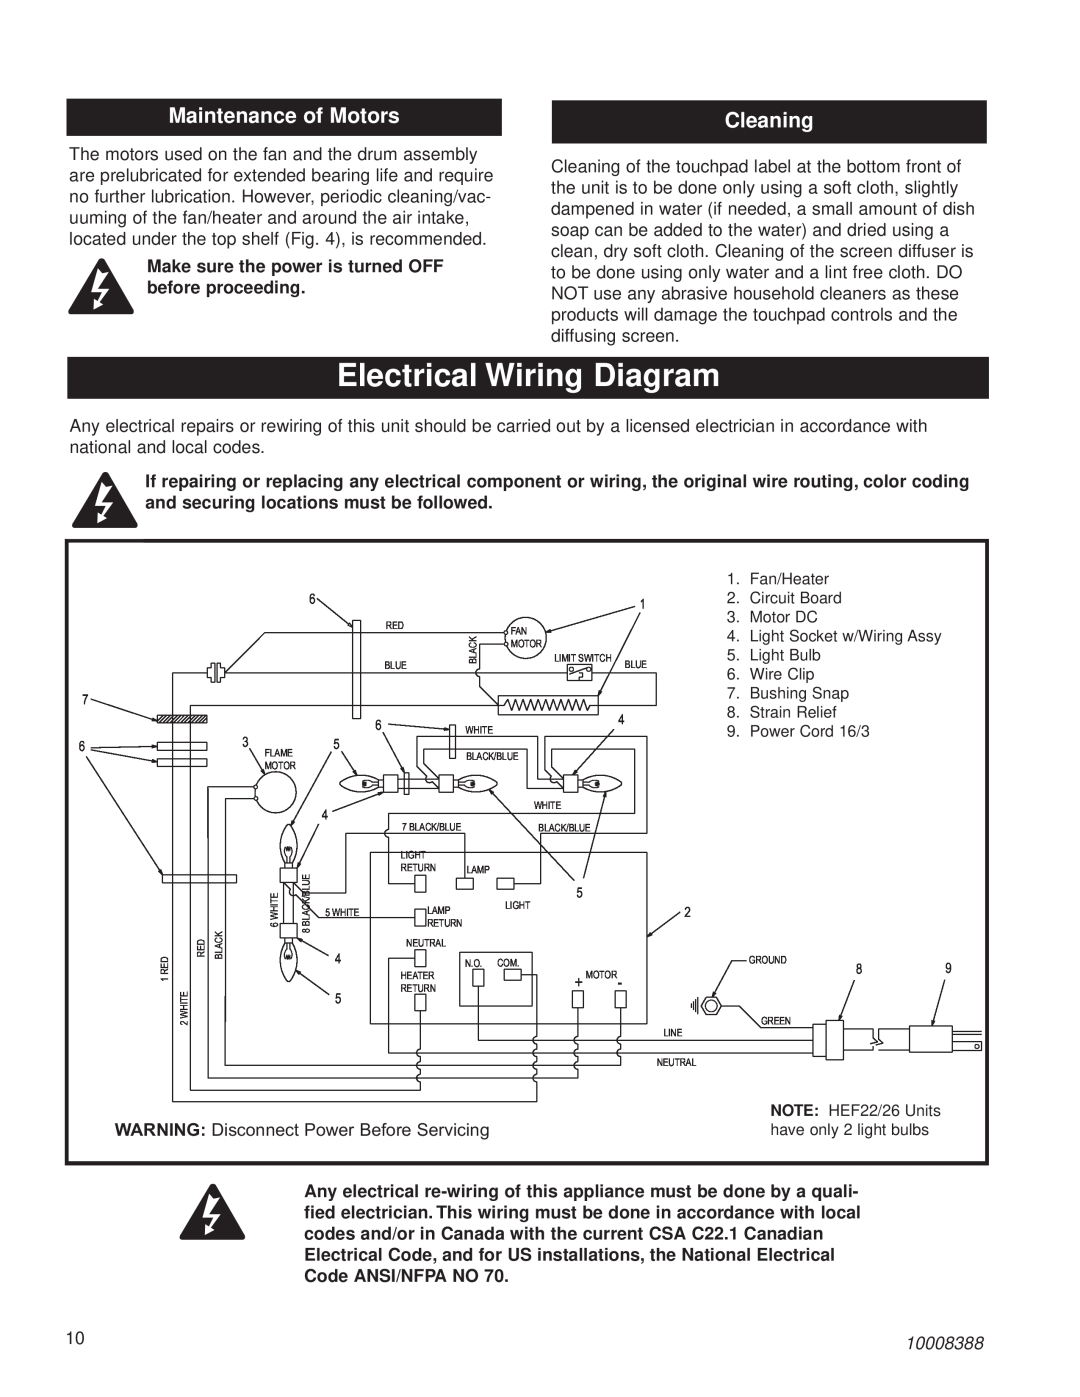 CFM Corporation HEF22 installation instructions Electrical Wiring Diagram, Maintenance of Motors, Cleaning, 10008388 